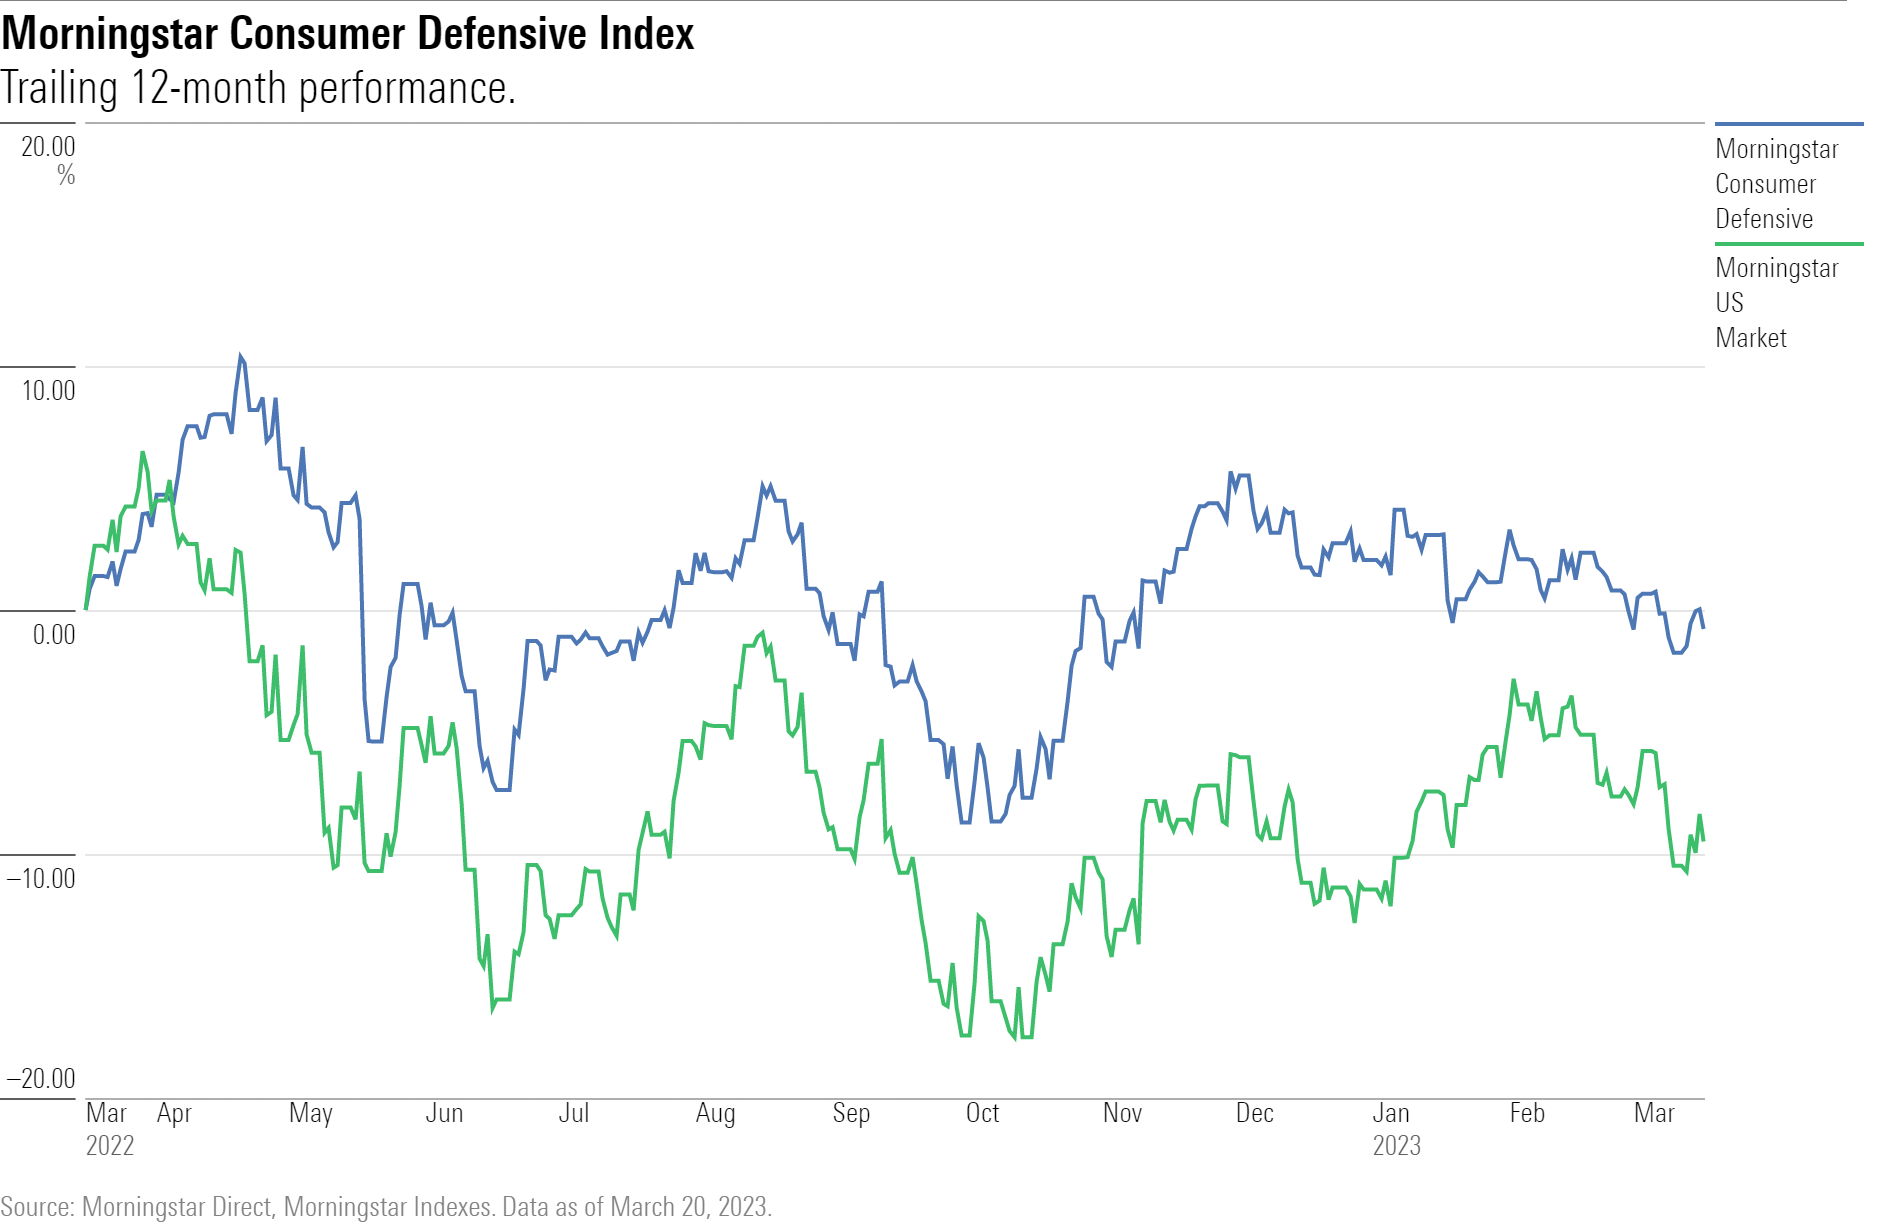 Line graph showing trailing 12-month performances for the Morningstar US Consumer Defensive Index and The Morningstar US Market Index for Mar. 2022-Feb. 2023